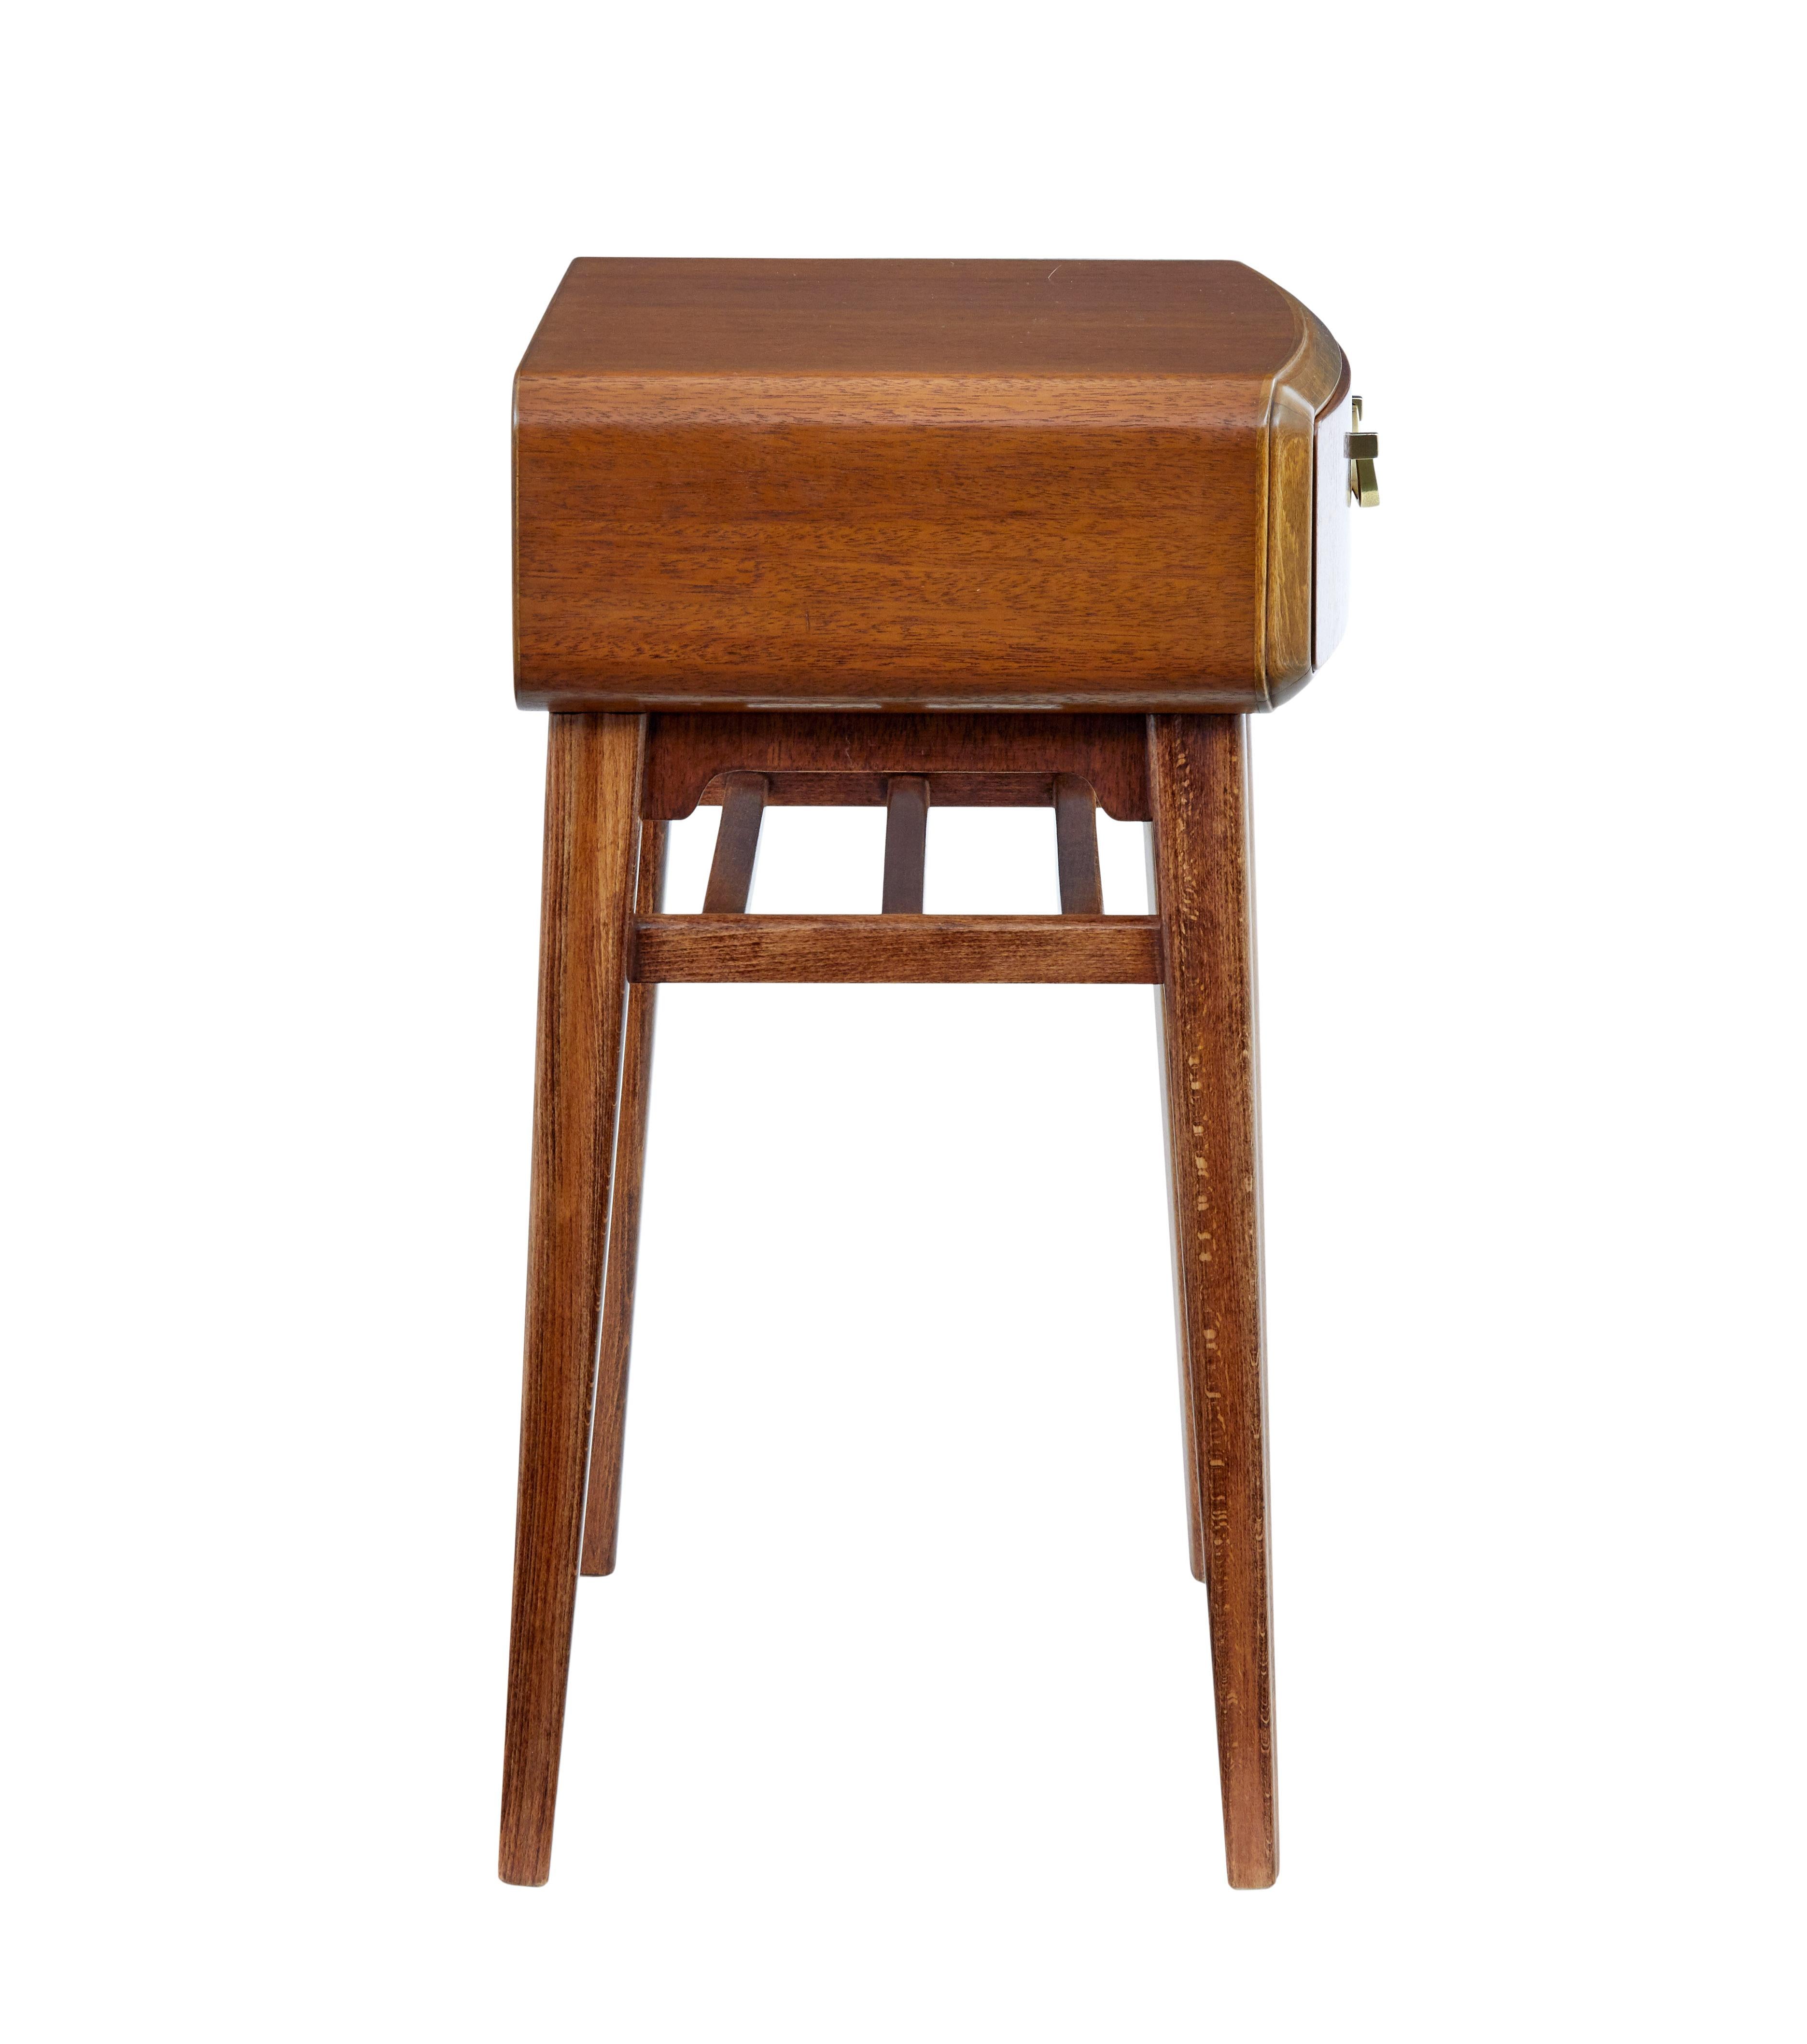 Hand-Crafted Mid-20th Century Mahogany Bedside Table by Bodafors For Sale